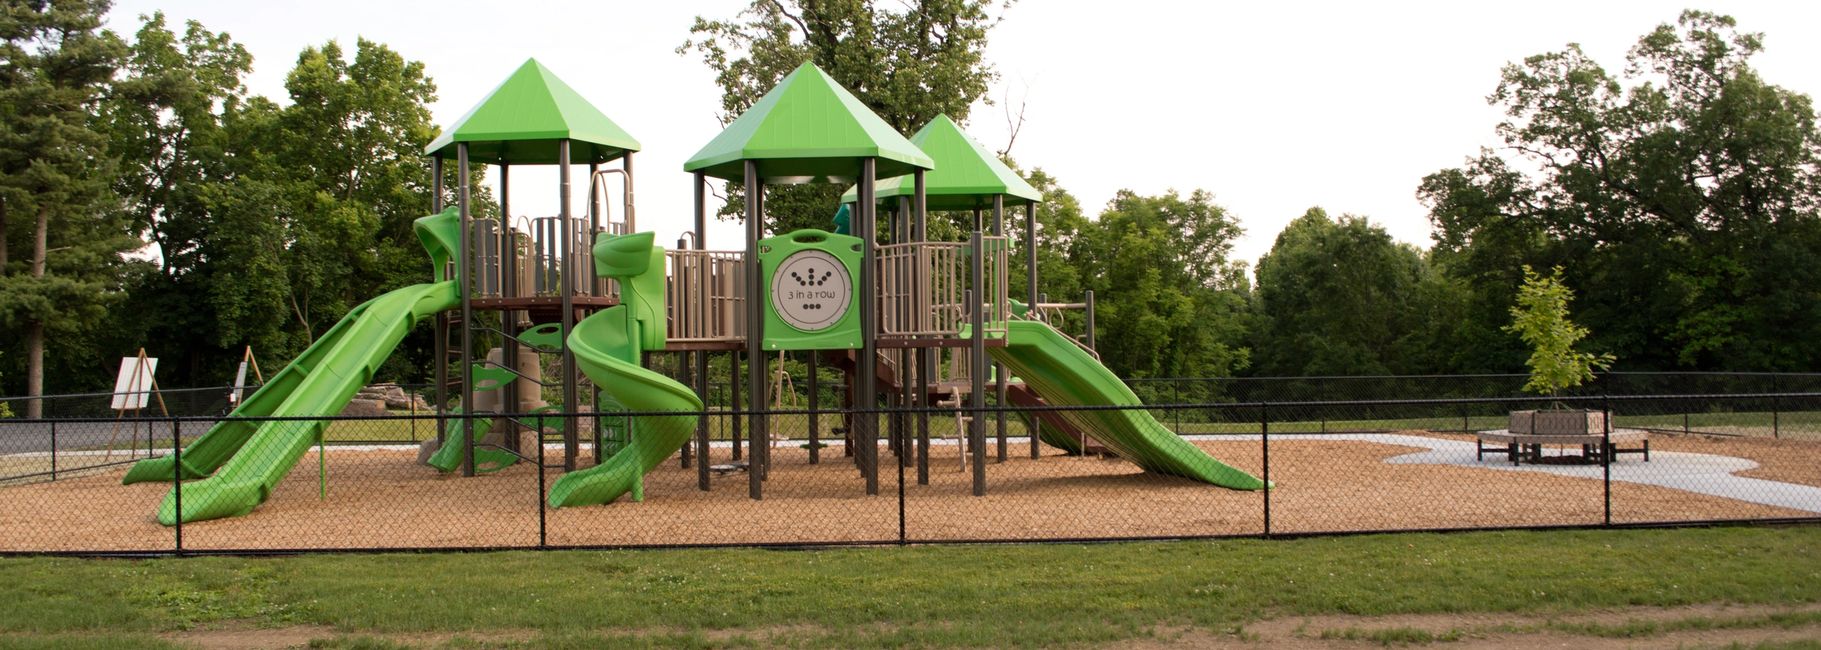 oasis travel center playground and picnic area